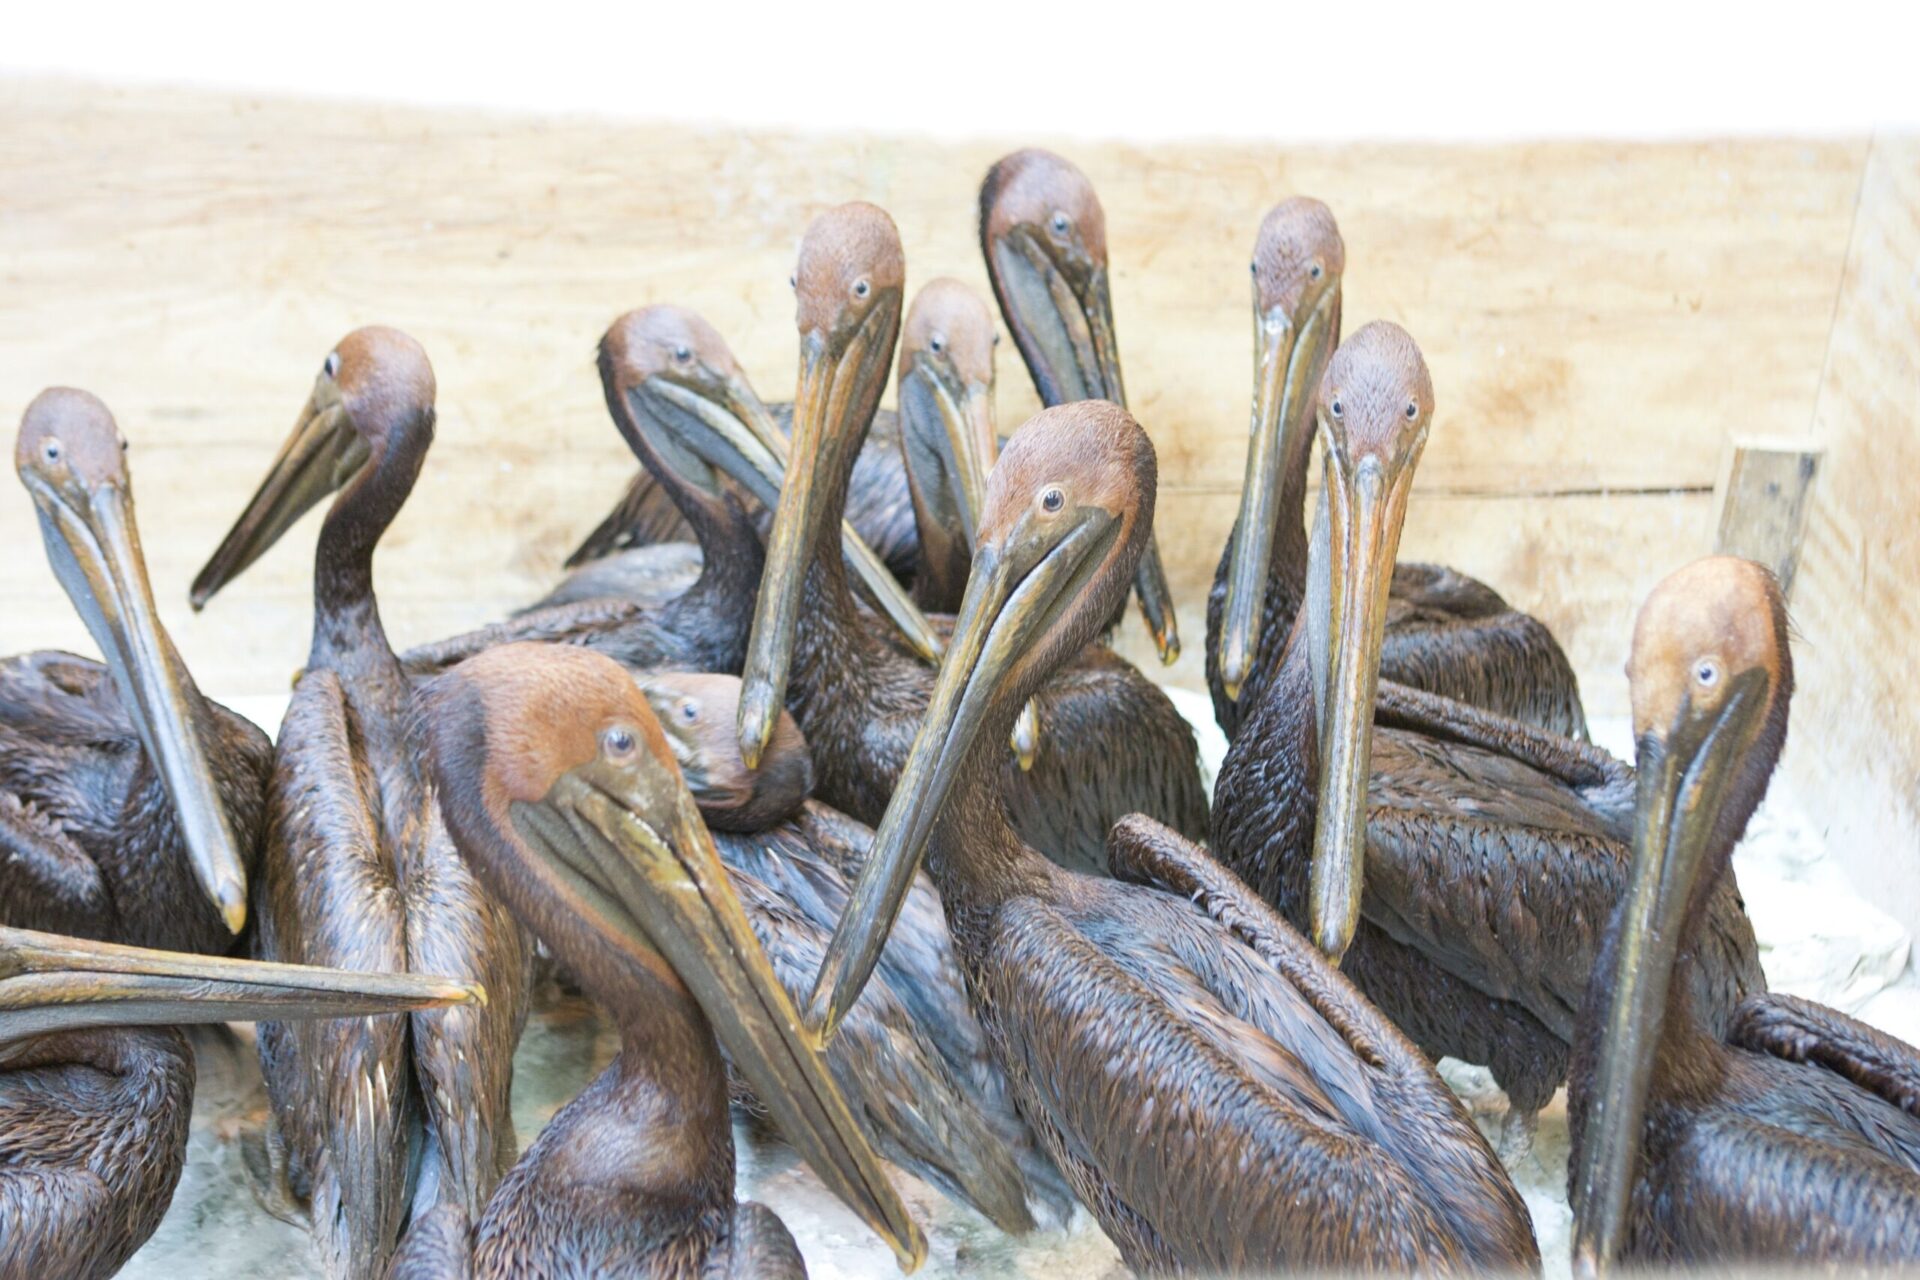 Group of Pelicans in a Wooden Crate